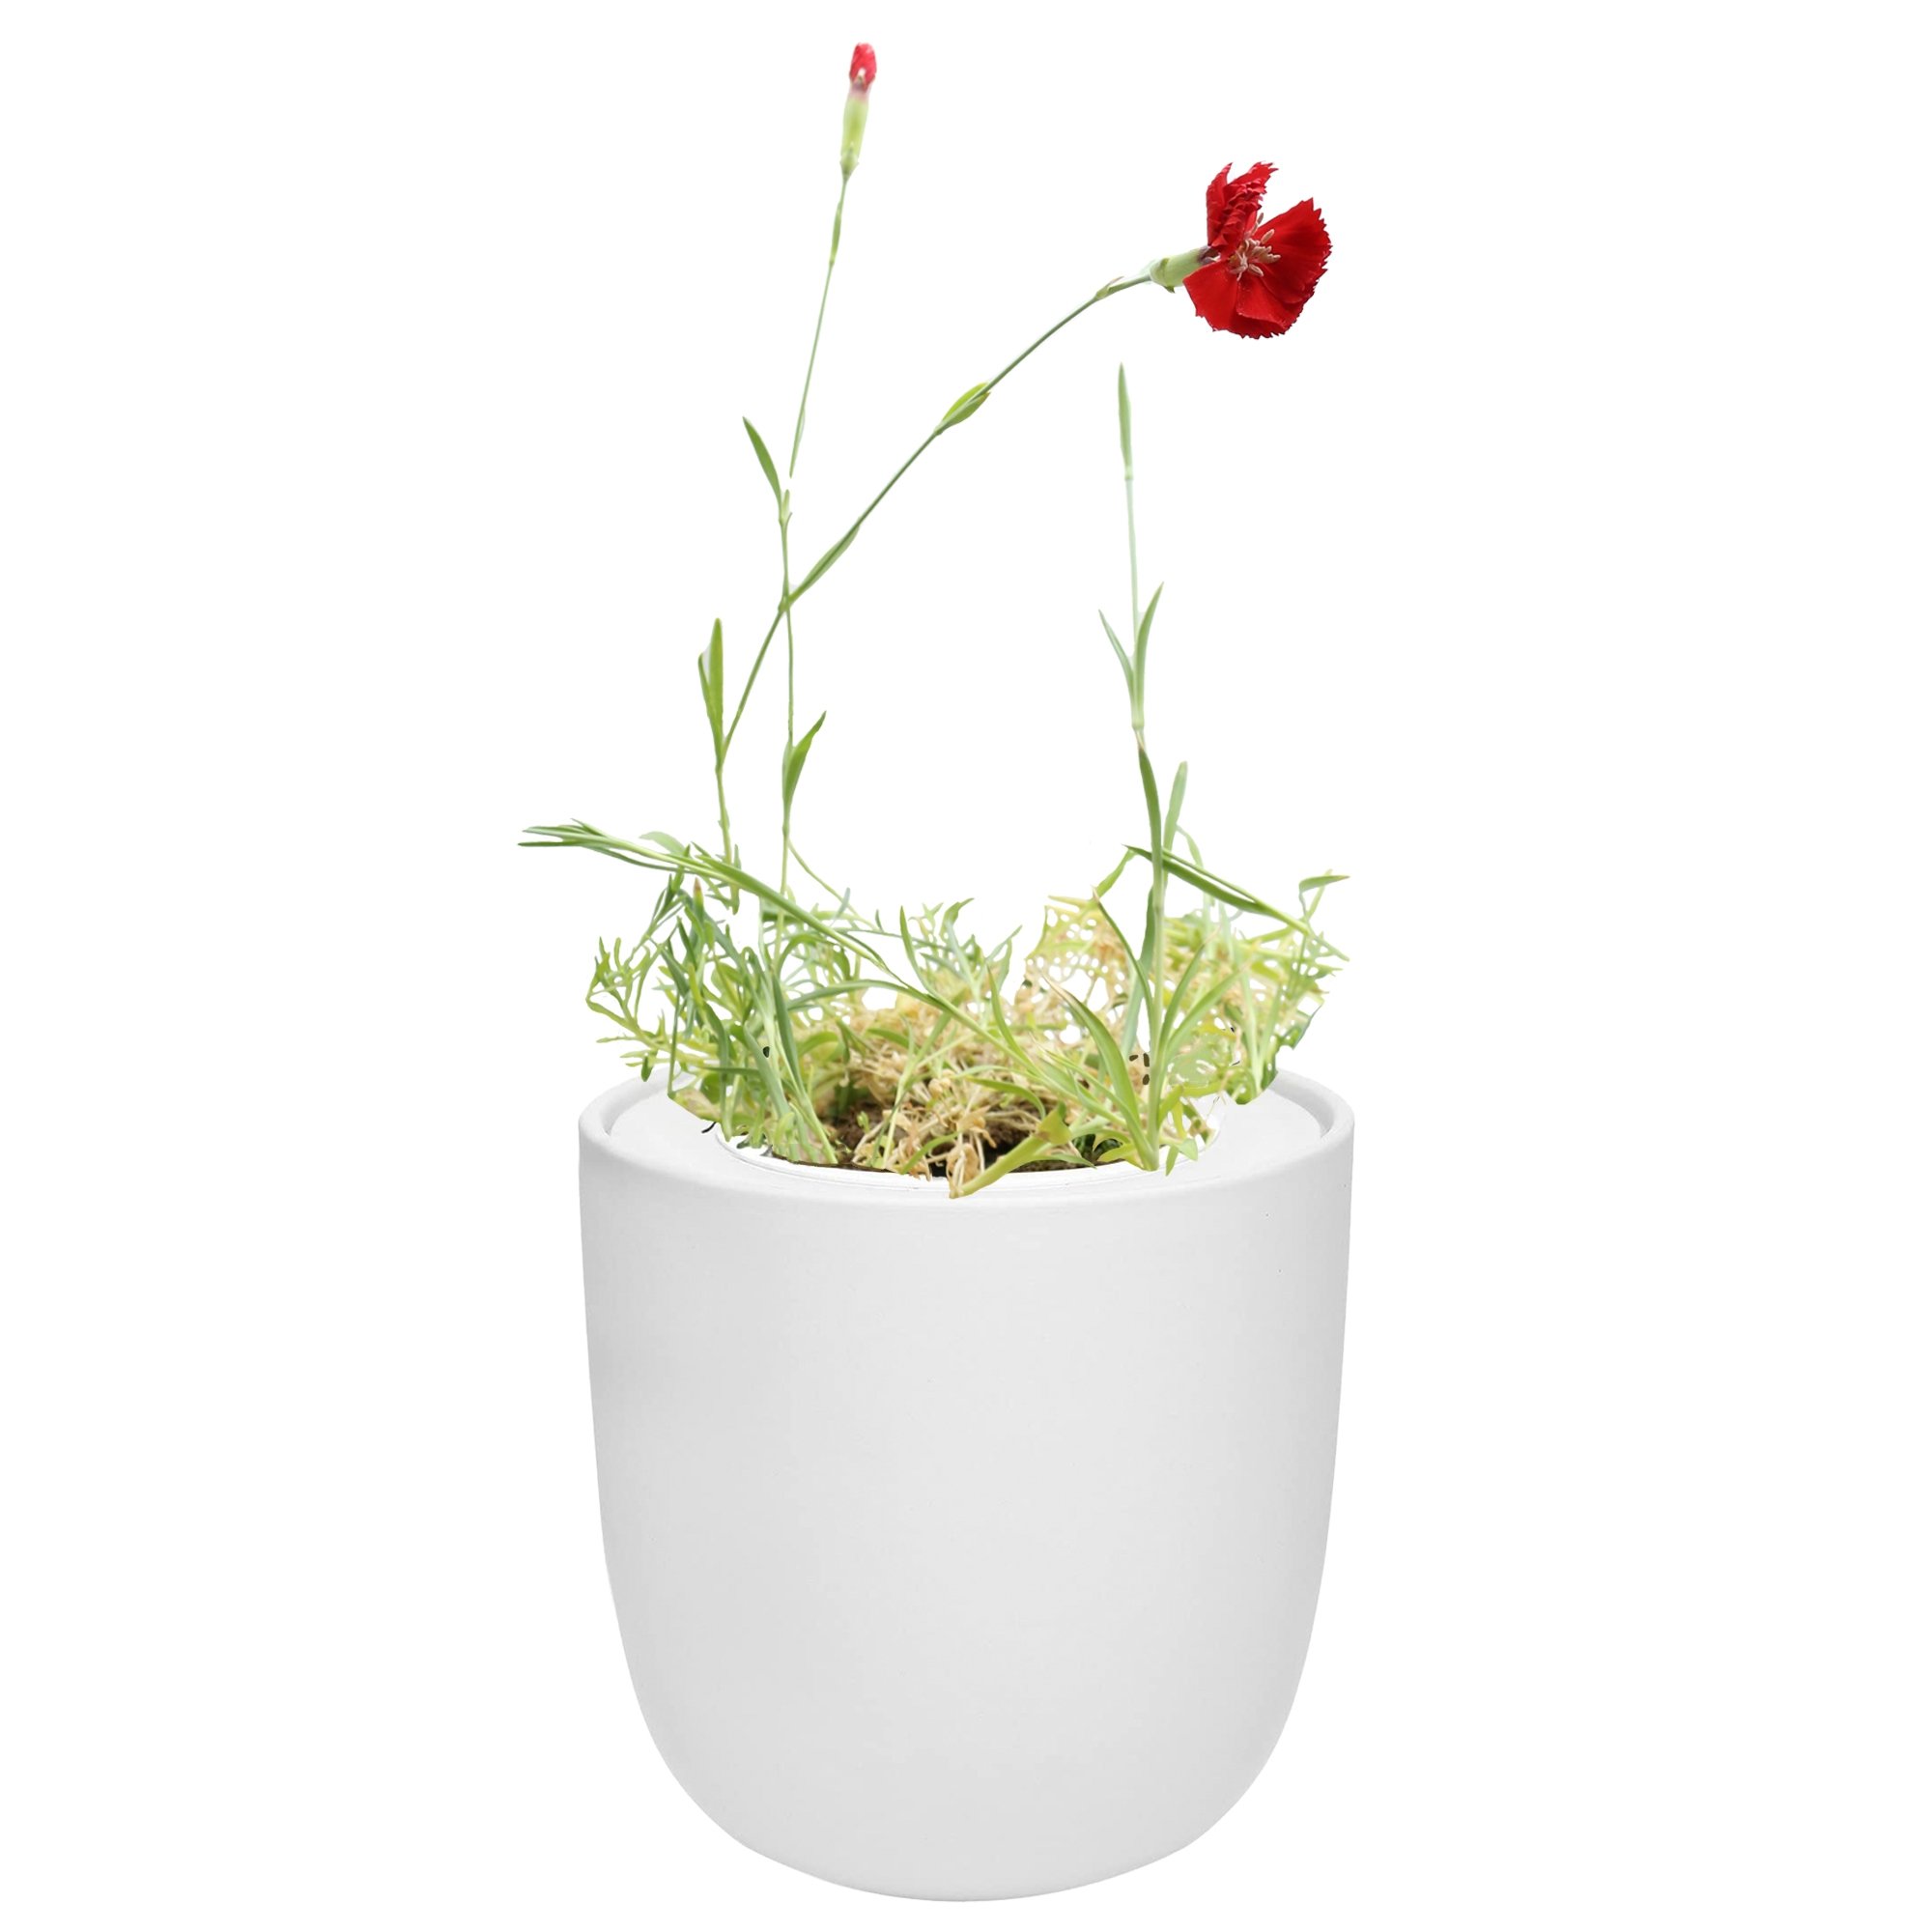 Hydroponic Growing Kit with White Ceramic Pot and Seeds (W-Carnation (Chabaud Giant Red))